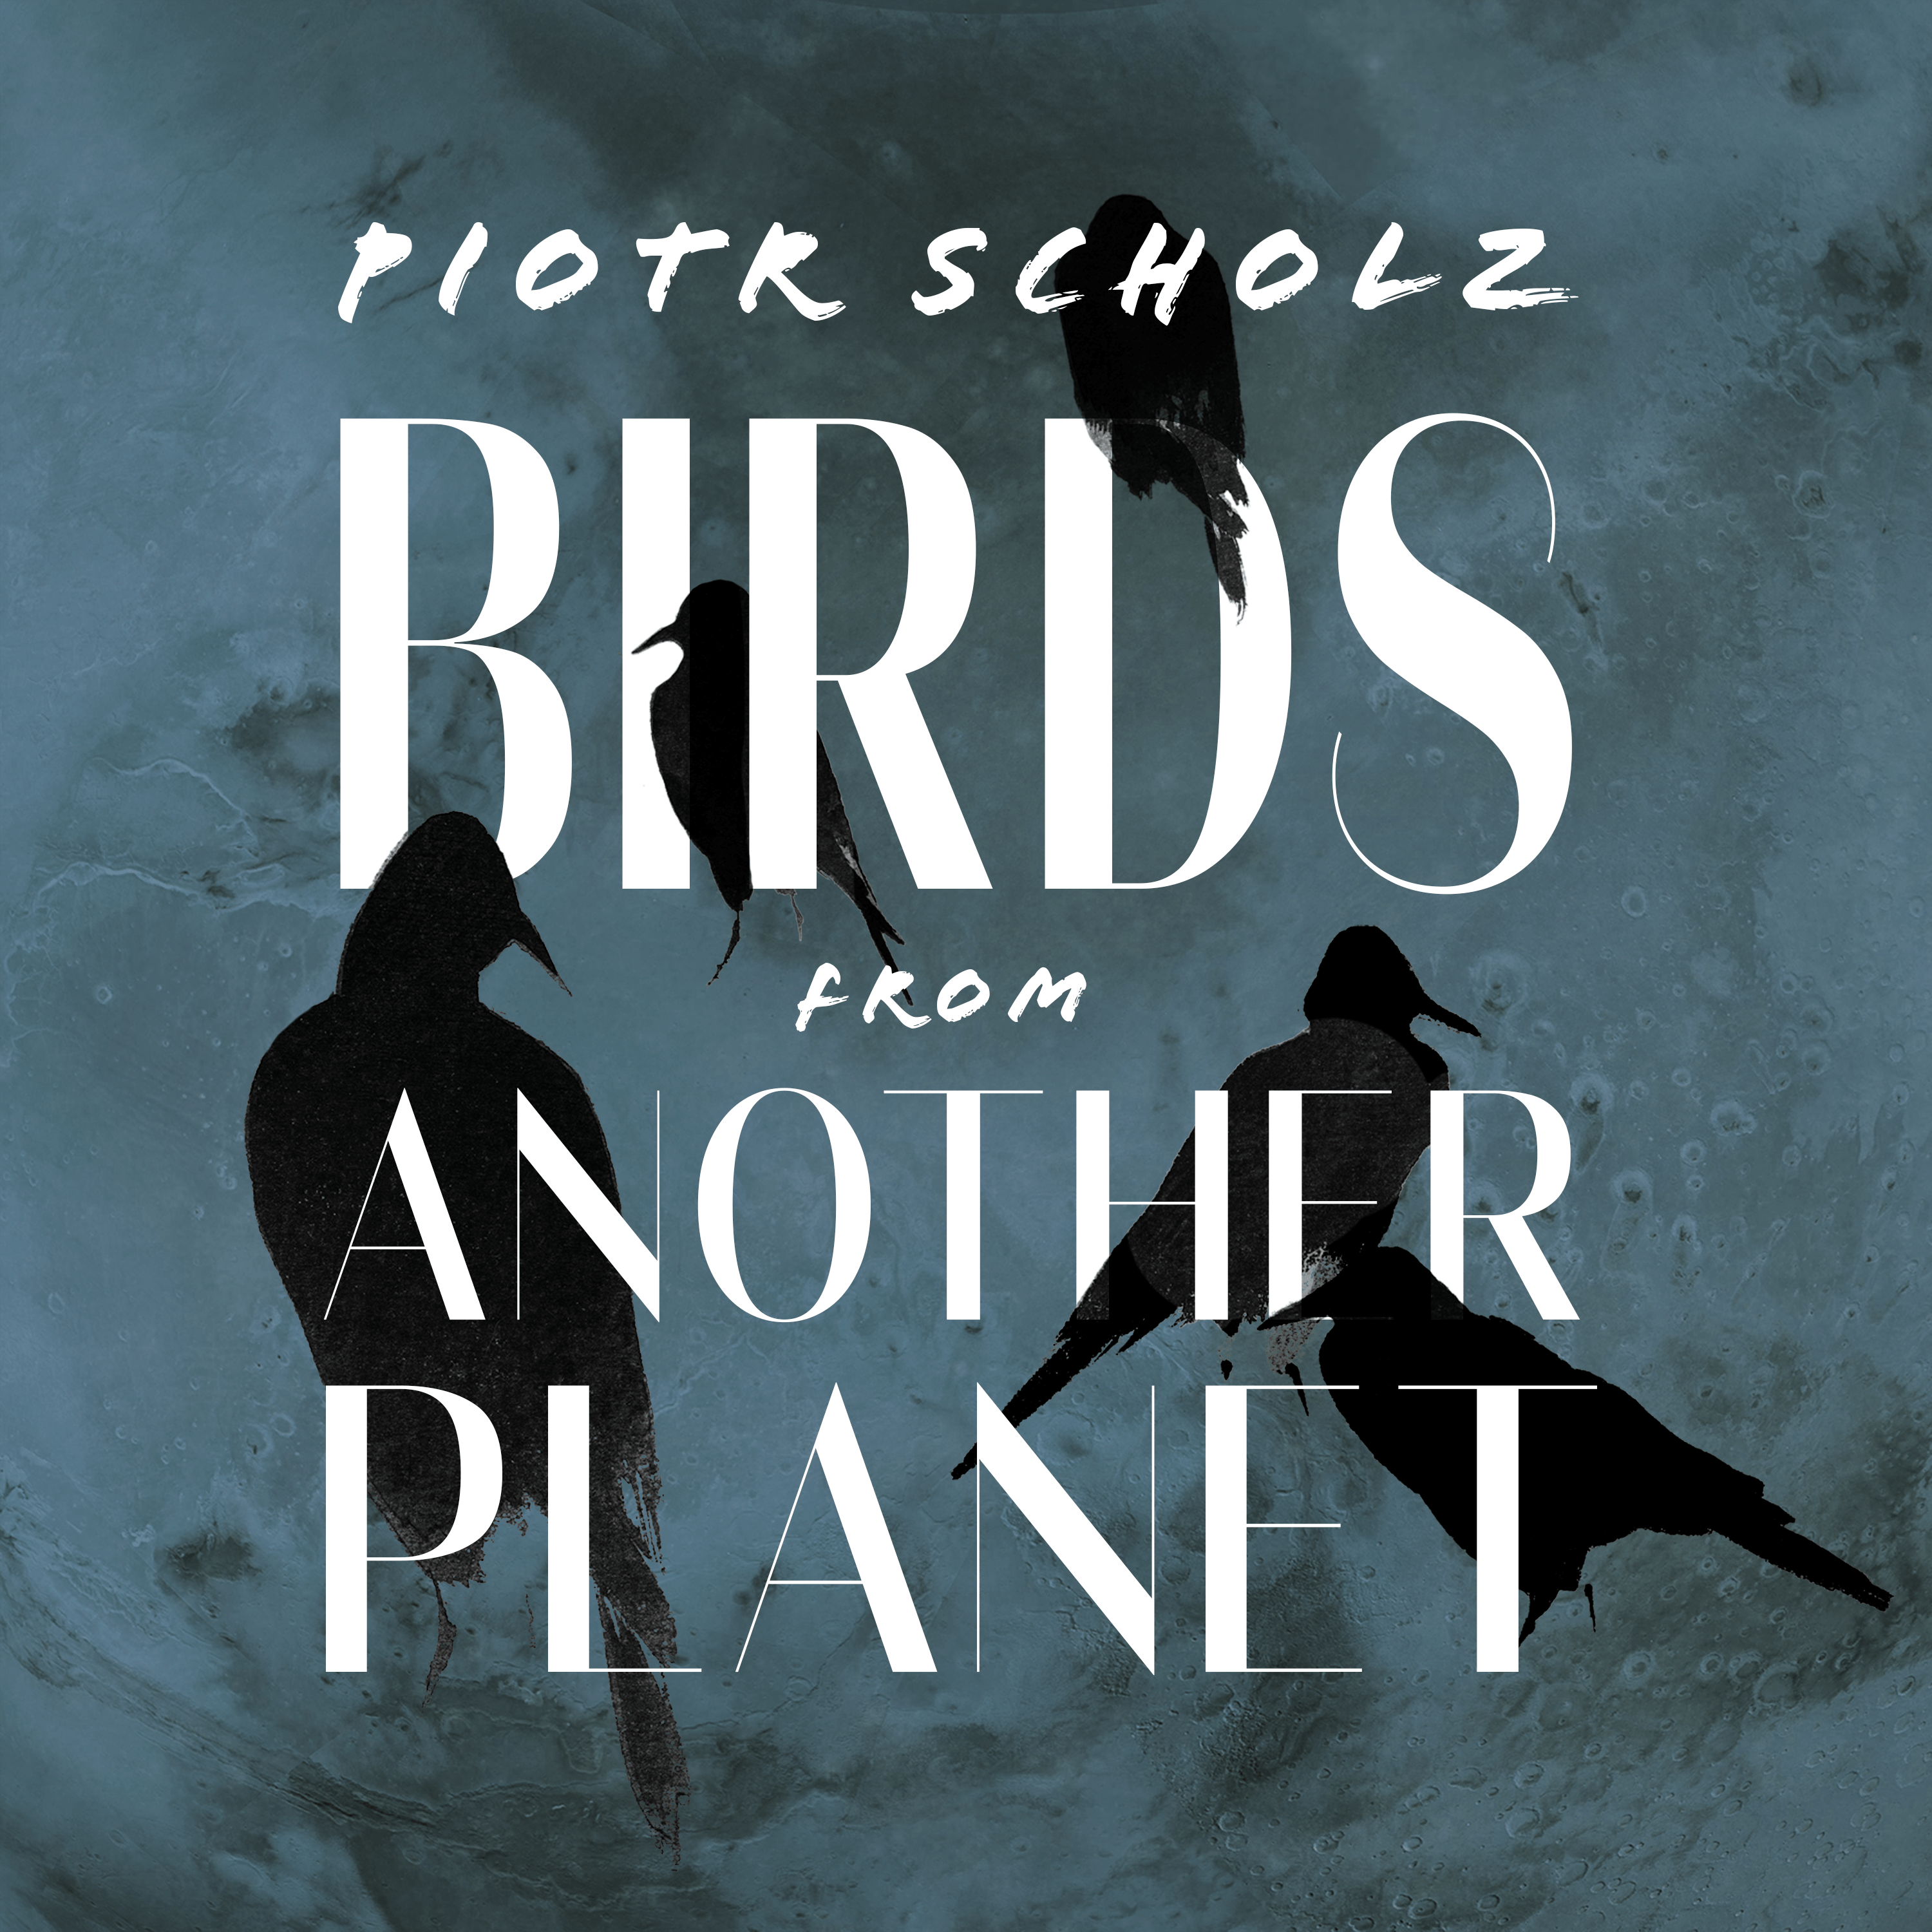 CD "BIRDS FROM ANOTHER PLANET" + CD "SUITE THE ROAD"